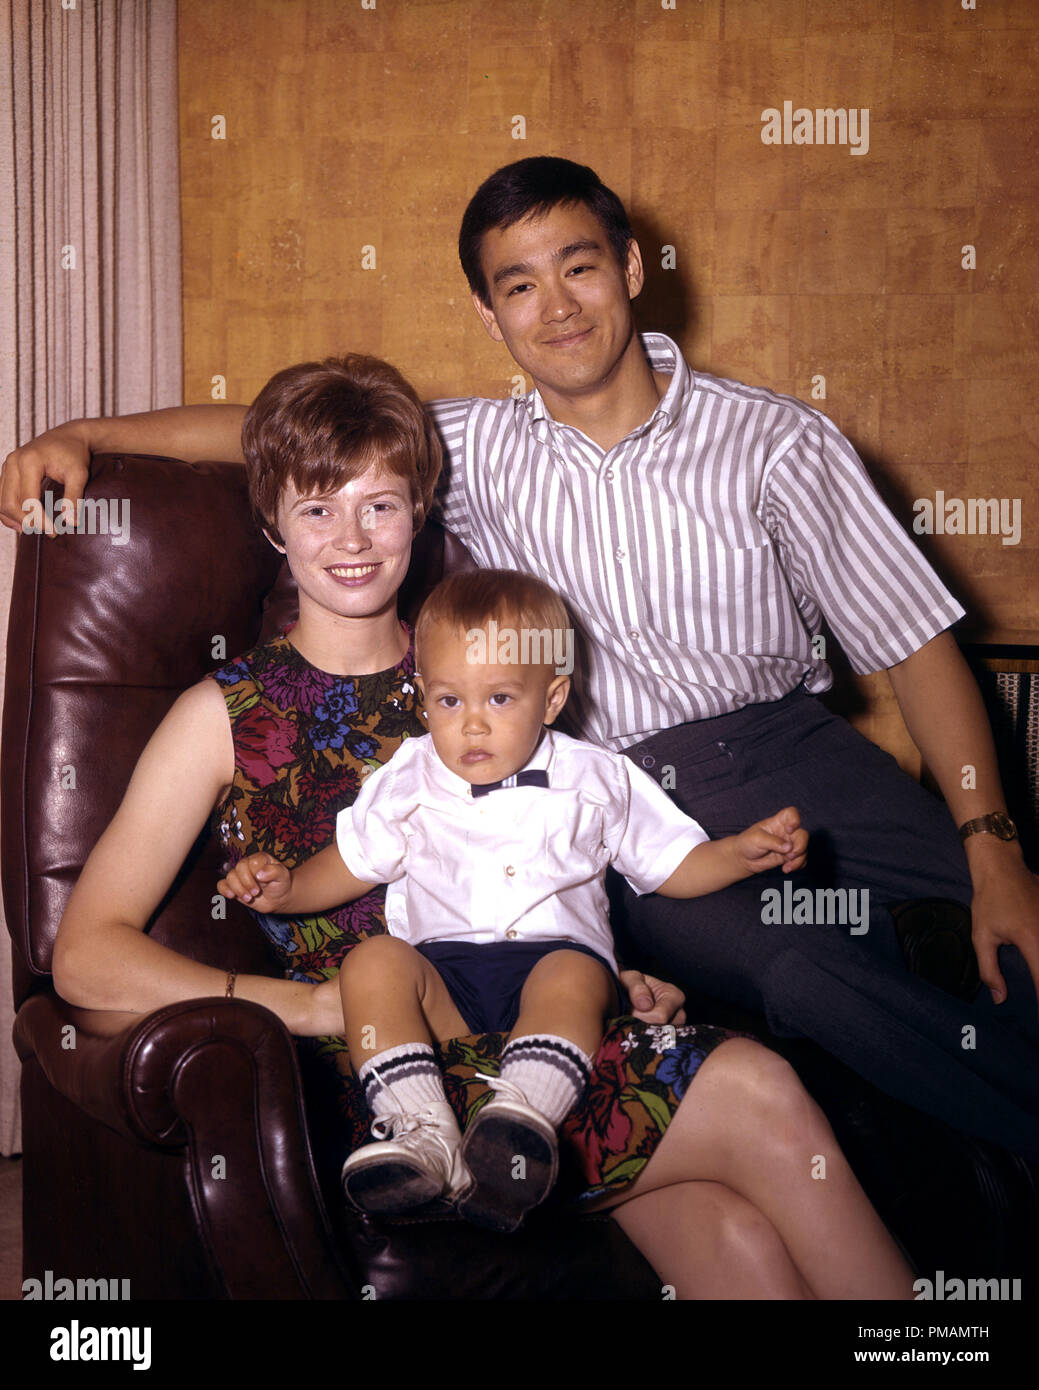 Bruce Lee With His Wife And Son Brandon Lee Circa 1967 File Reference 041tha For Editorial Use Only All Rights Reserved Stock Photo Alamy